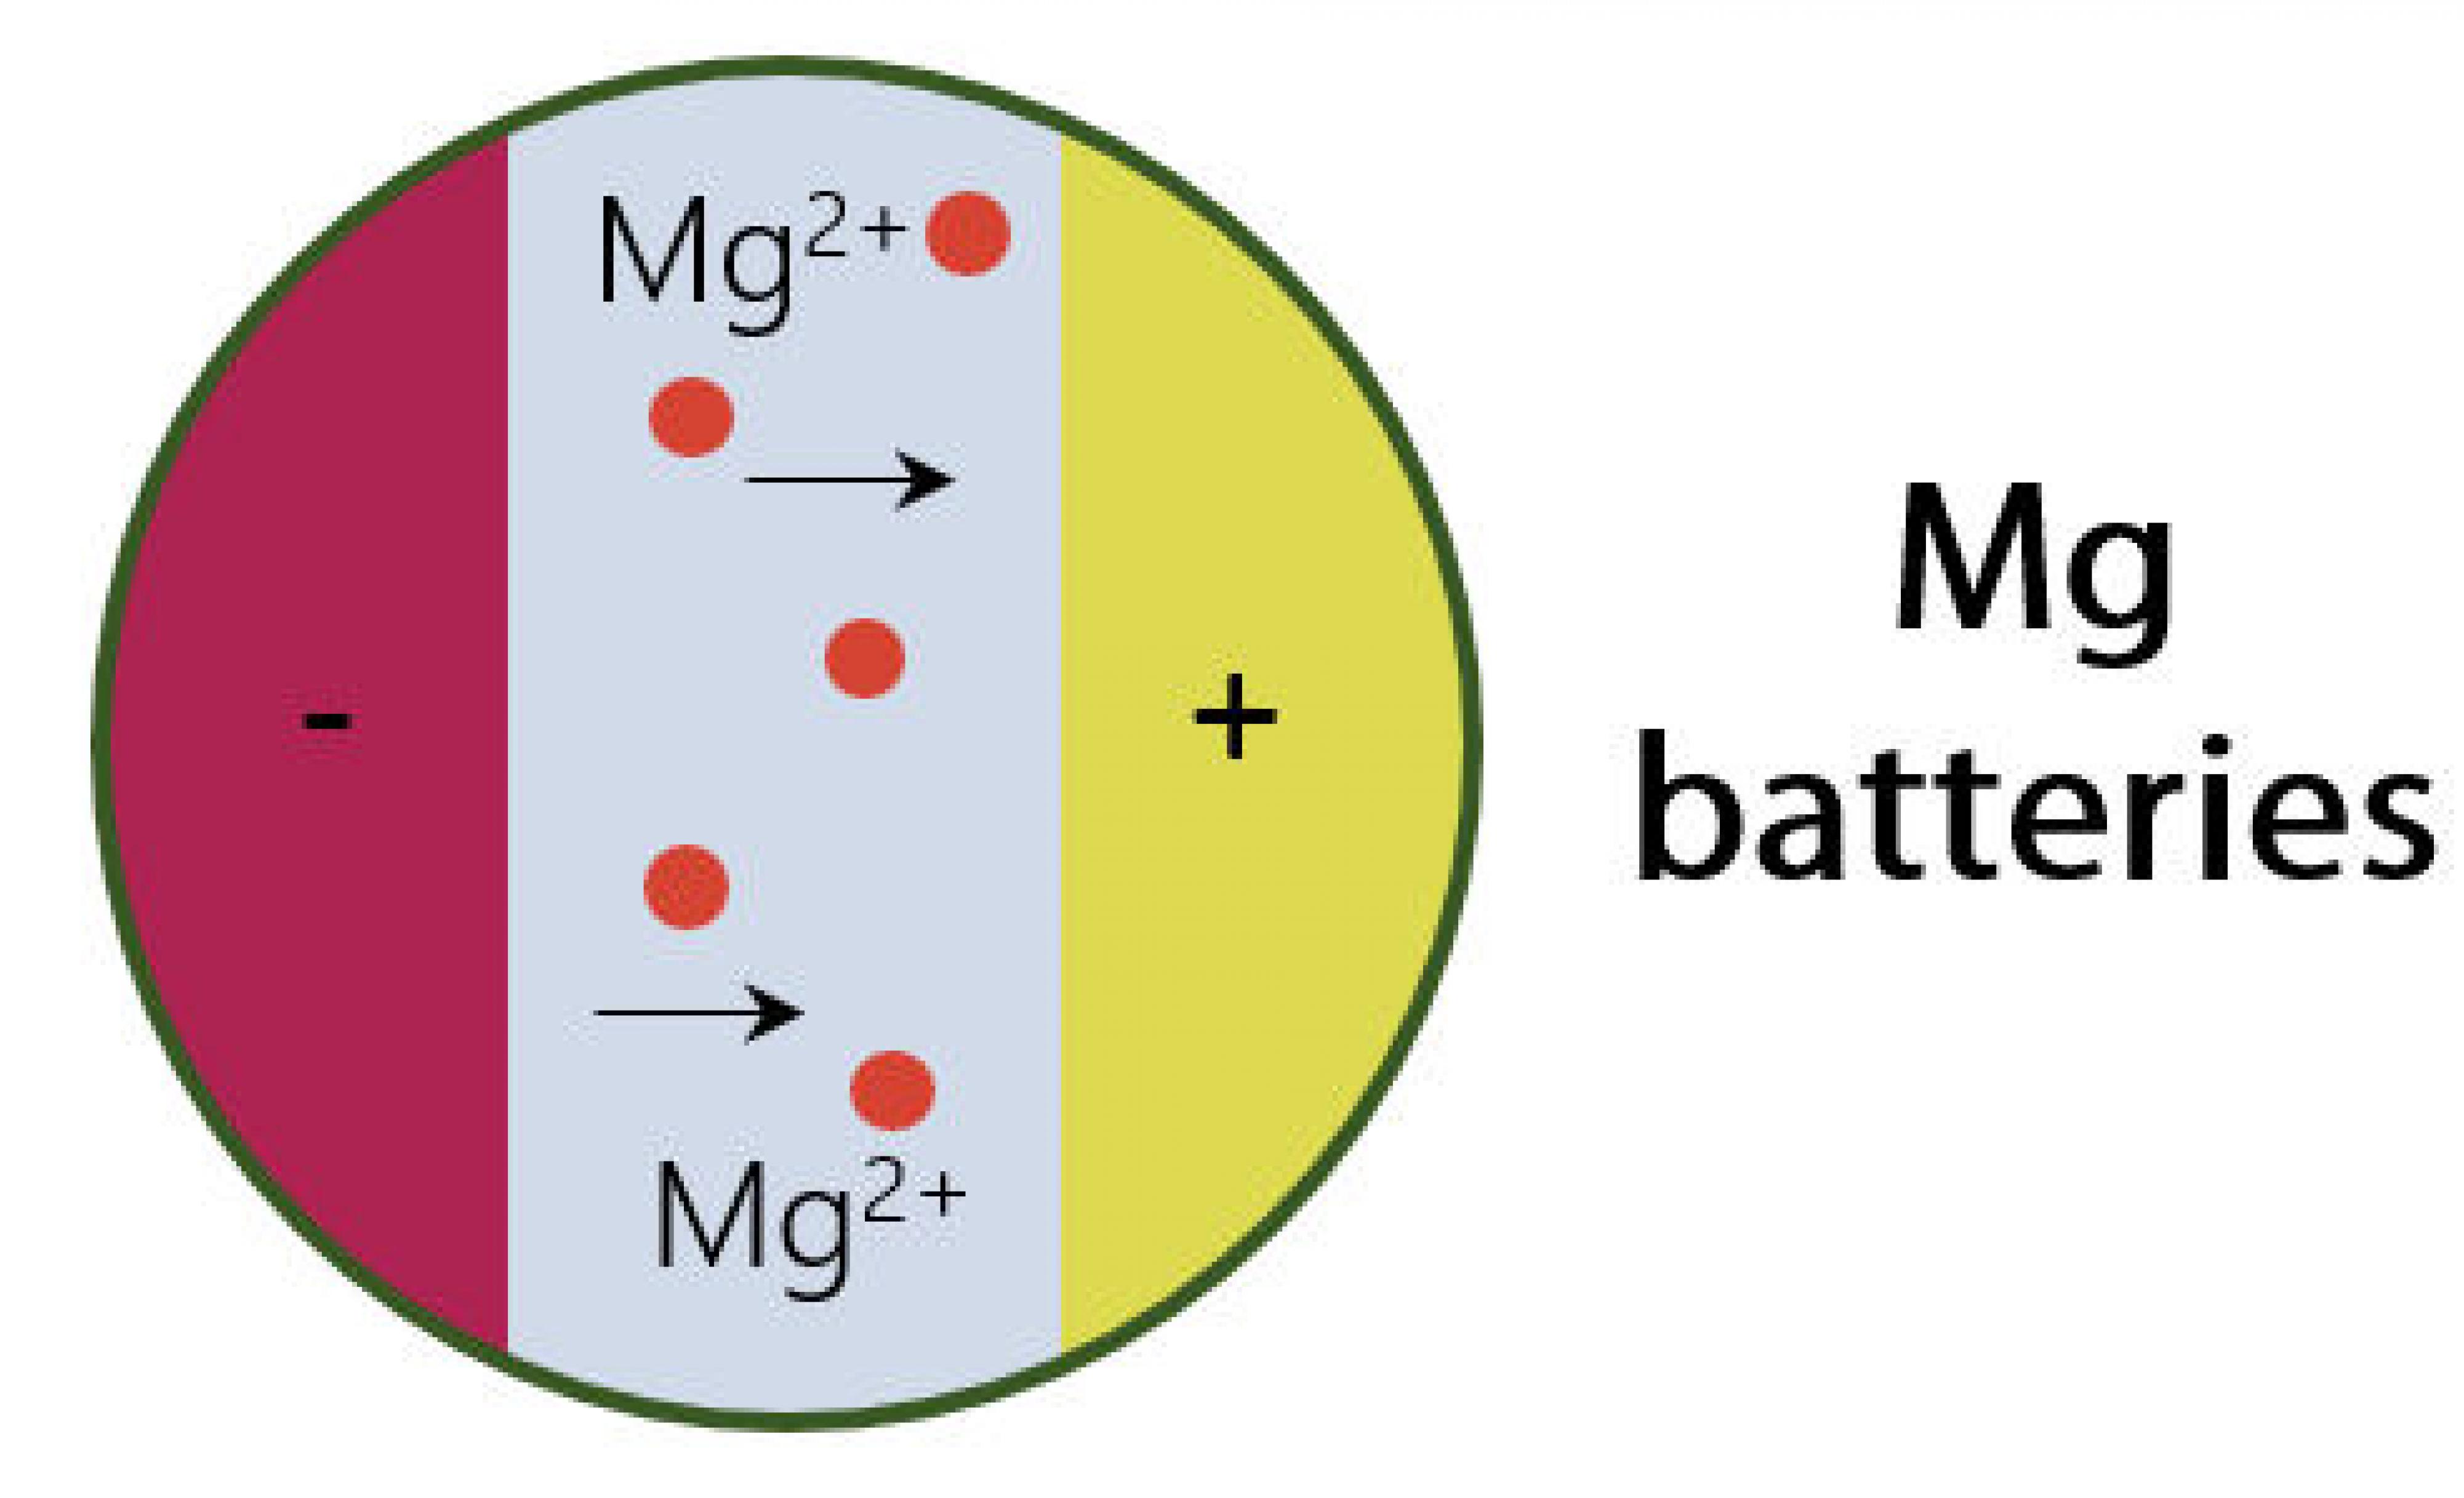 Exploring nanostructured alloys as negative electrodes for Mg-ion batteries